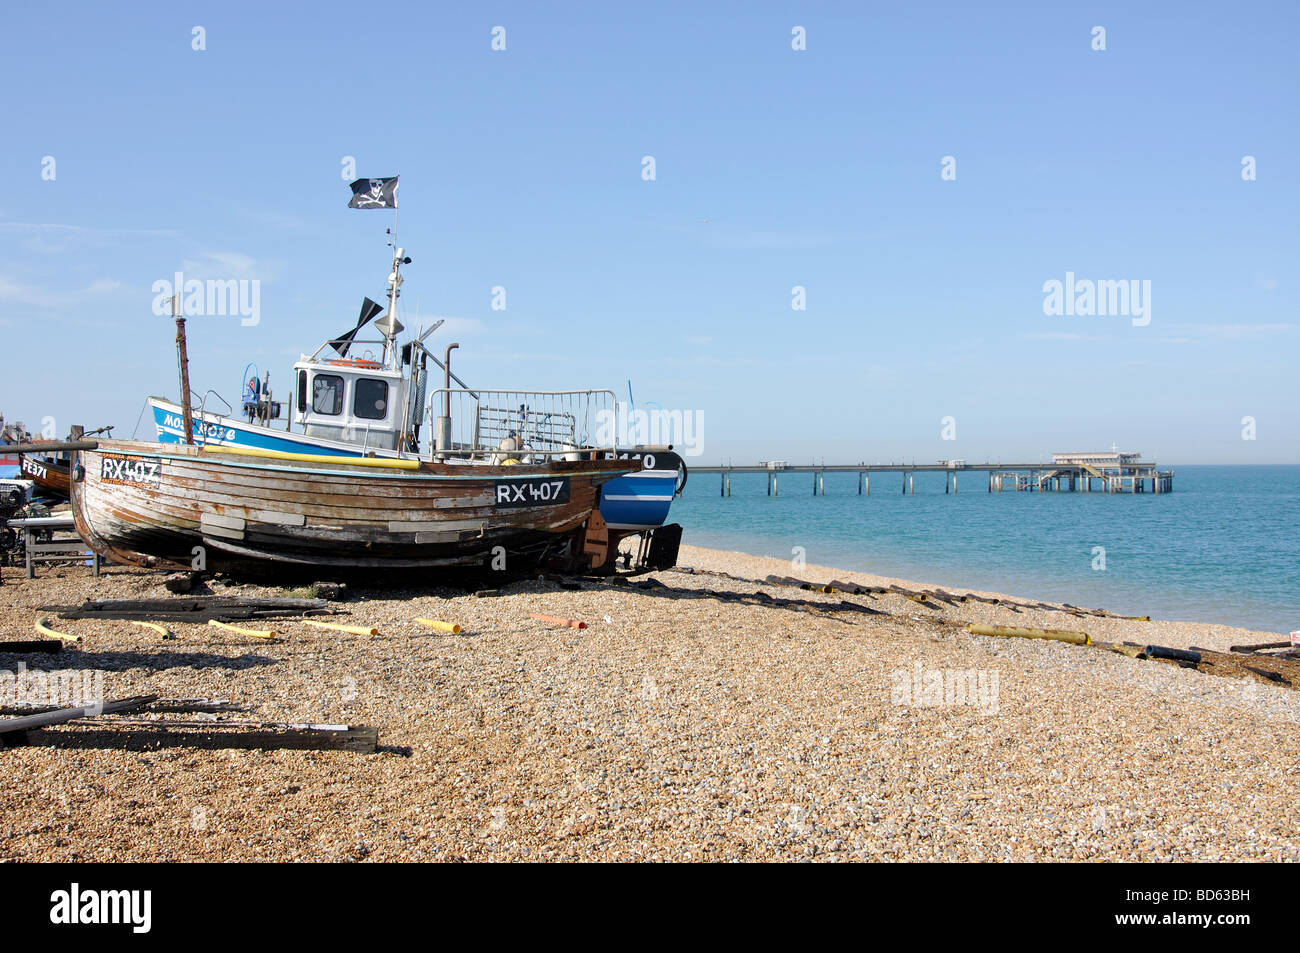 Wooden fishing boat on beach, Deal, Kent, England, United Kingdom Stock Photo